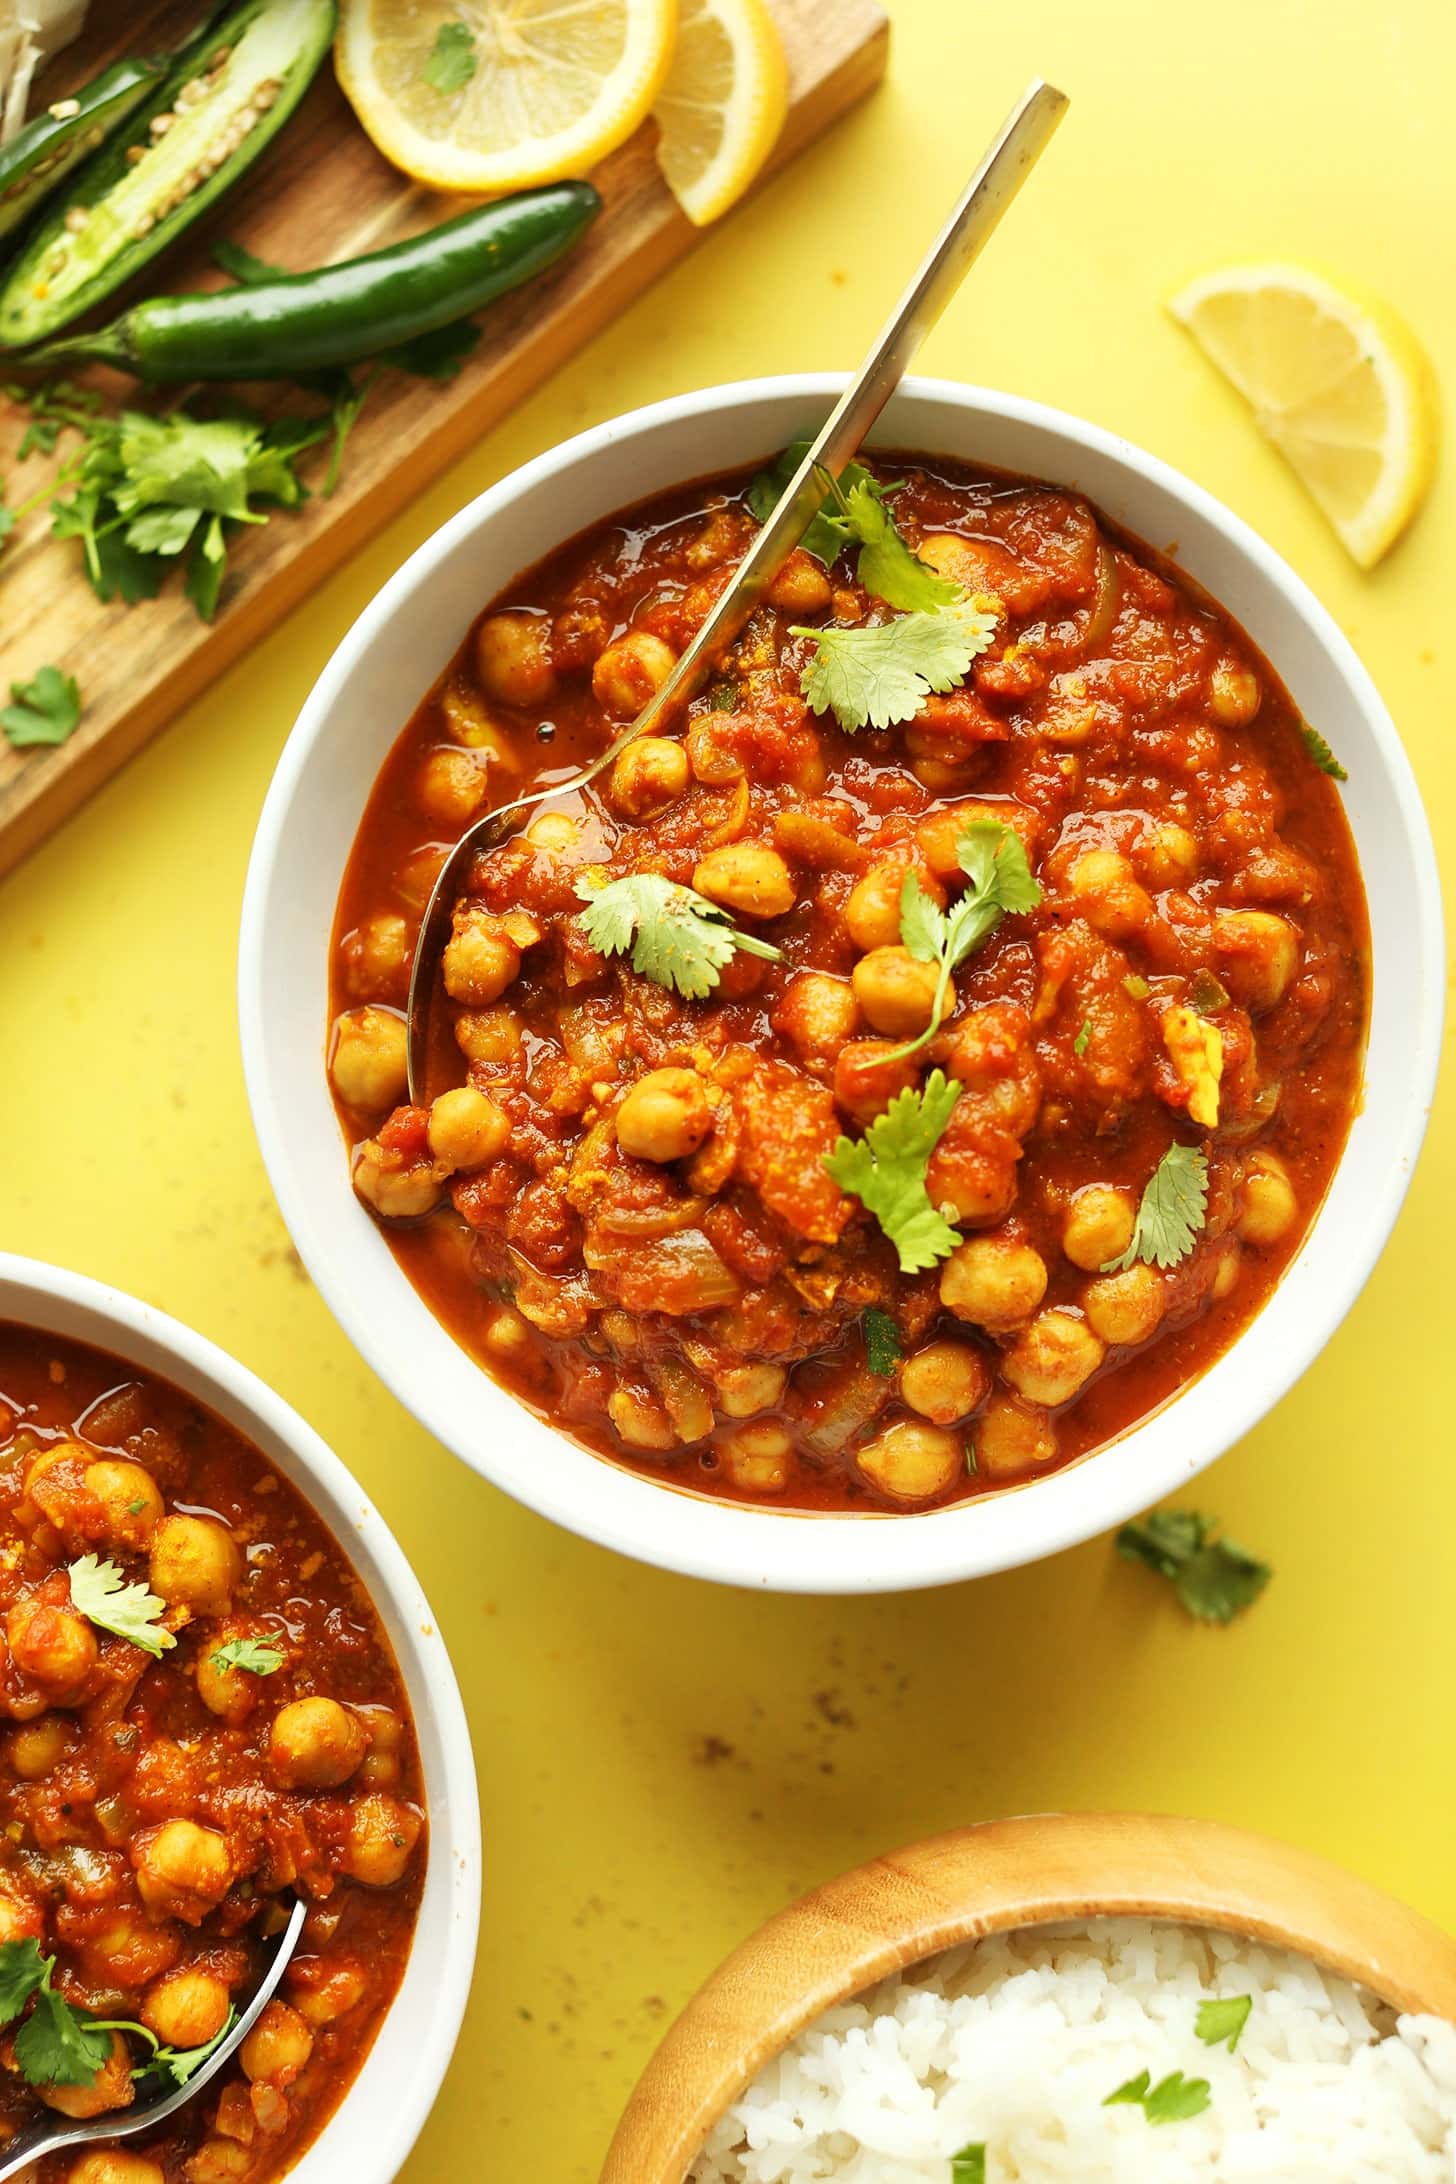 Bowls of Chana Masala with peppers, lemon slices and parsley